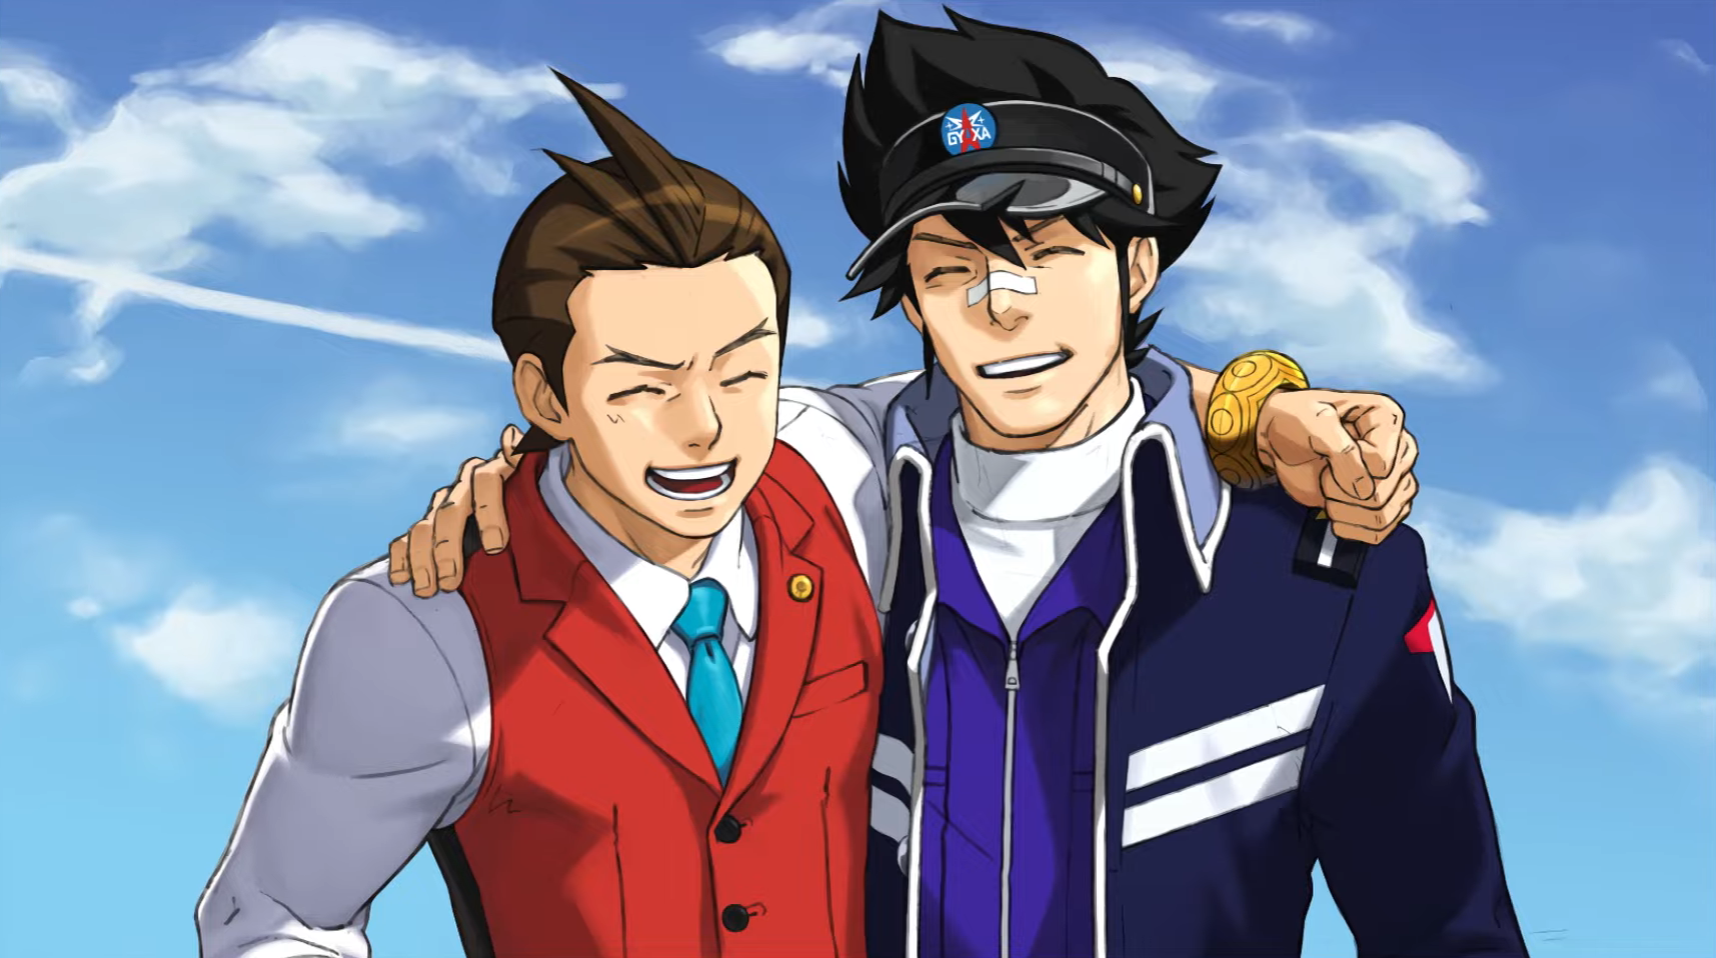 New Apollo Justice: Ace Attorney Trilogy English-Dubbed Trailer Introduces Dual Destinies Case 4, “The Cosmic Turnabout”